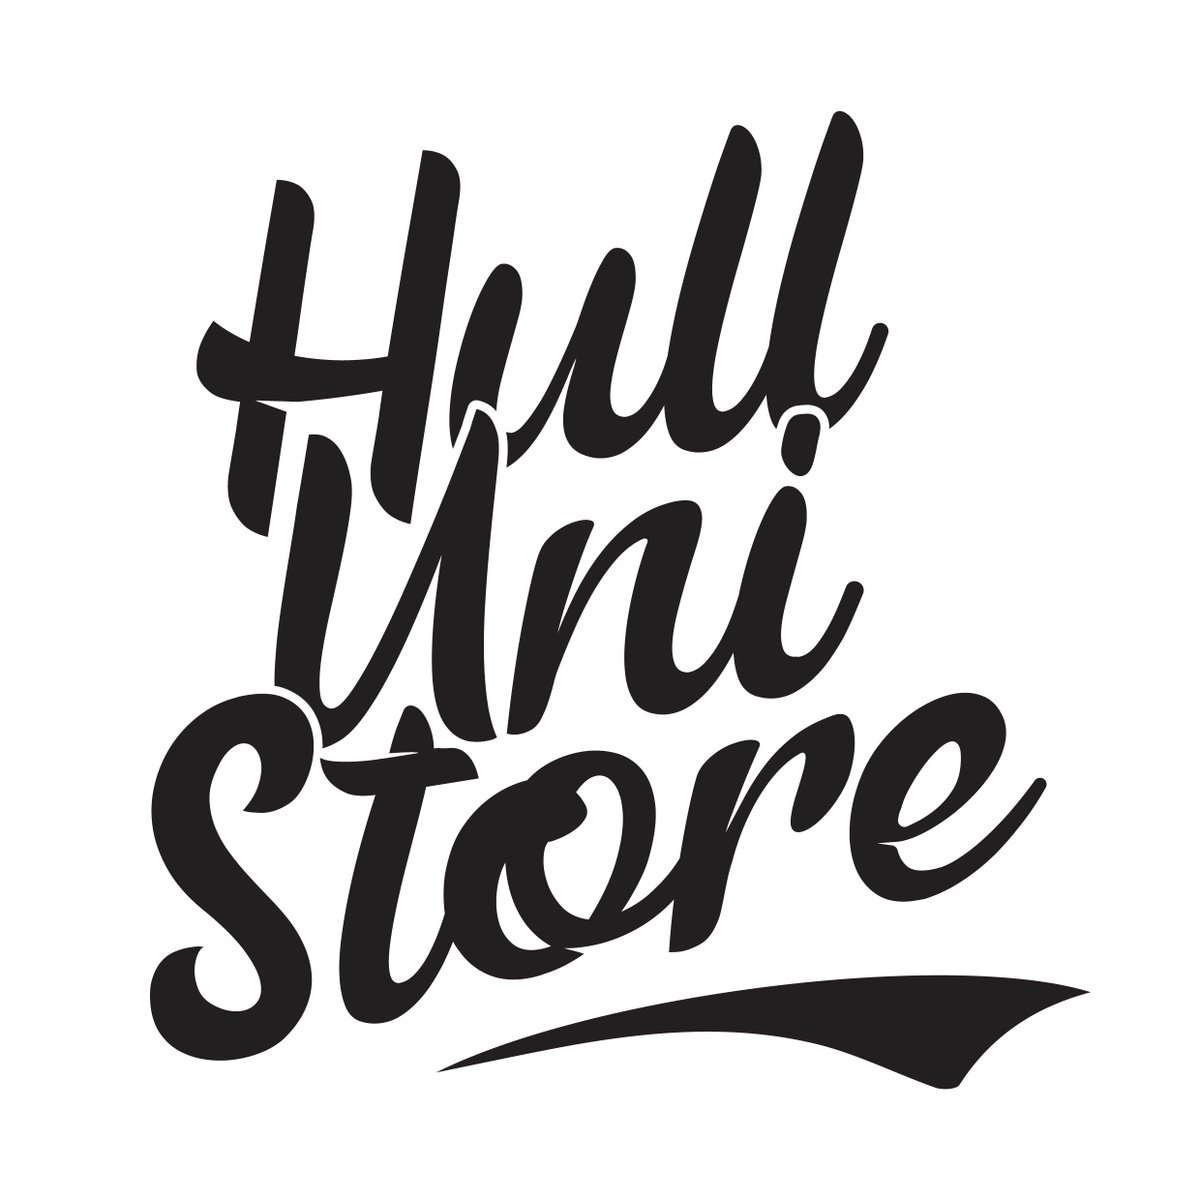 Head over to hullunistore.com and see what we've been busy creating! Thanks to @bluebeany_art and the residents of Humber St. for supporting our photoshoot last month. Subscribe to our mailing list and get 20% off your first order.